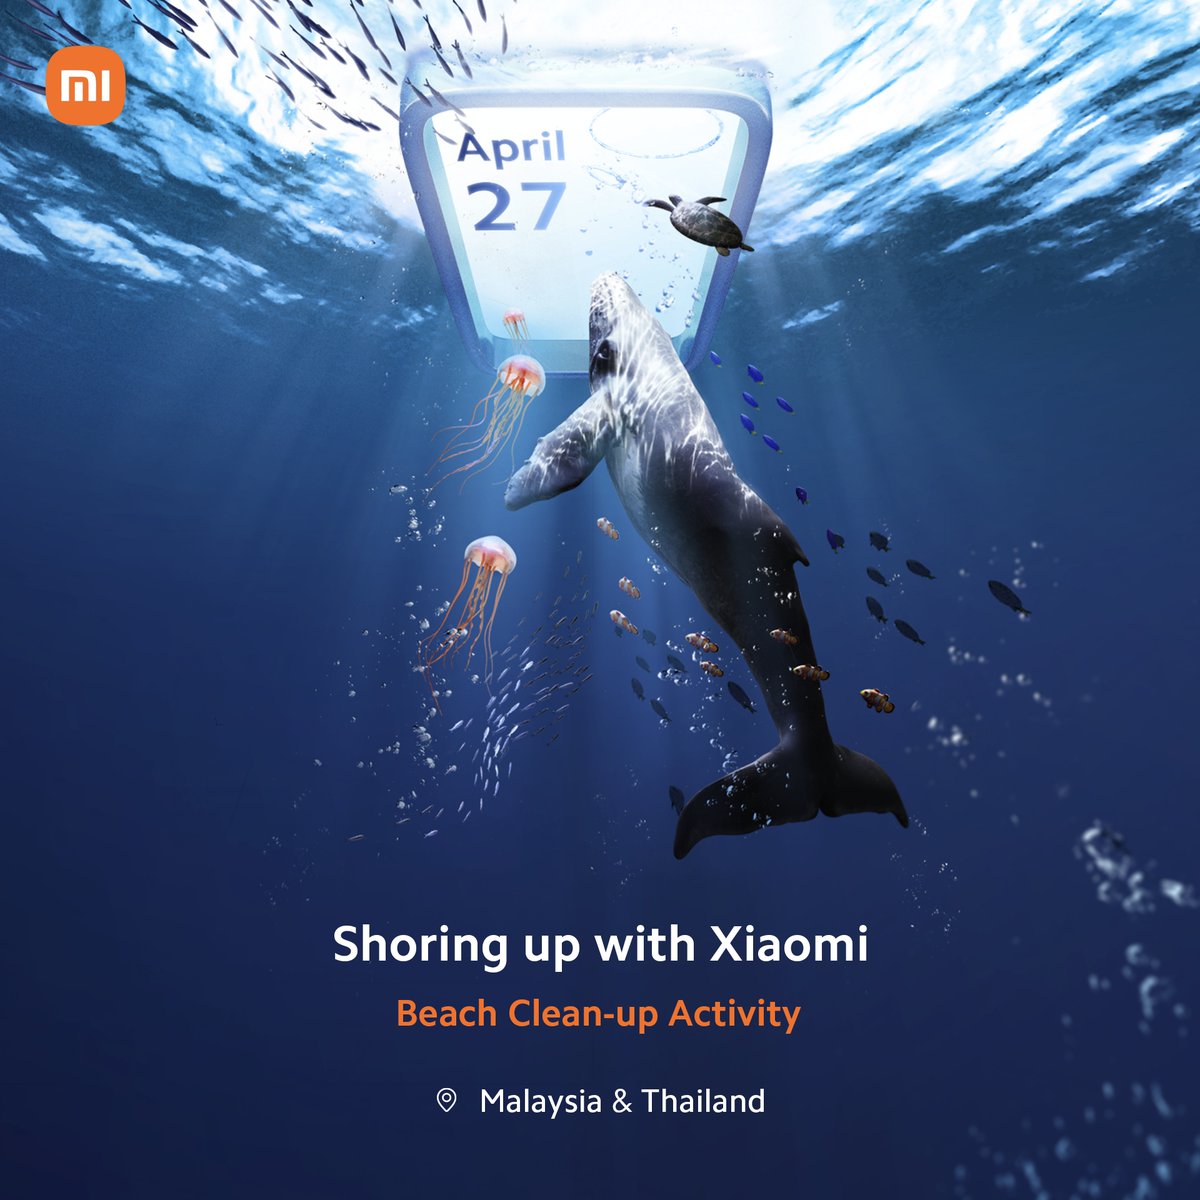 Tomorrow is the day we go #ShoringUpWithXiaomi! We're teaming up with @PADI and #XiaomiFans to launch a beach clean-up activity for an #EarthDay effort together! 📍Bangsaen, Thailand 📍Pantai Bagan Pinang Batu, Malaysia